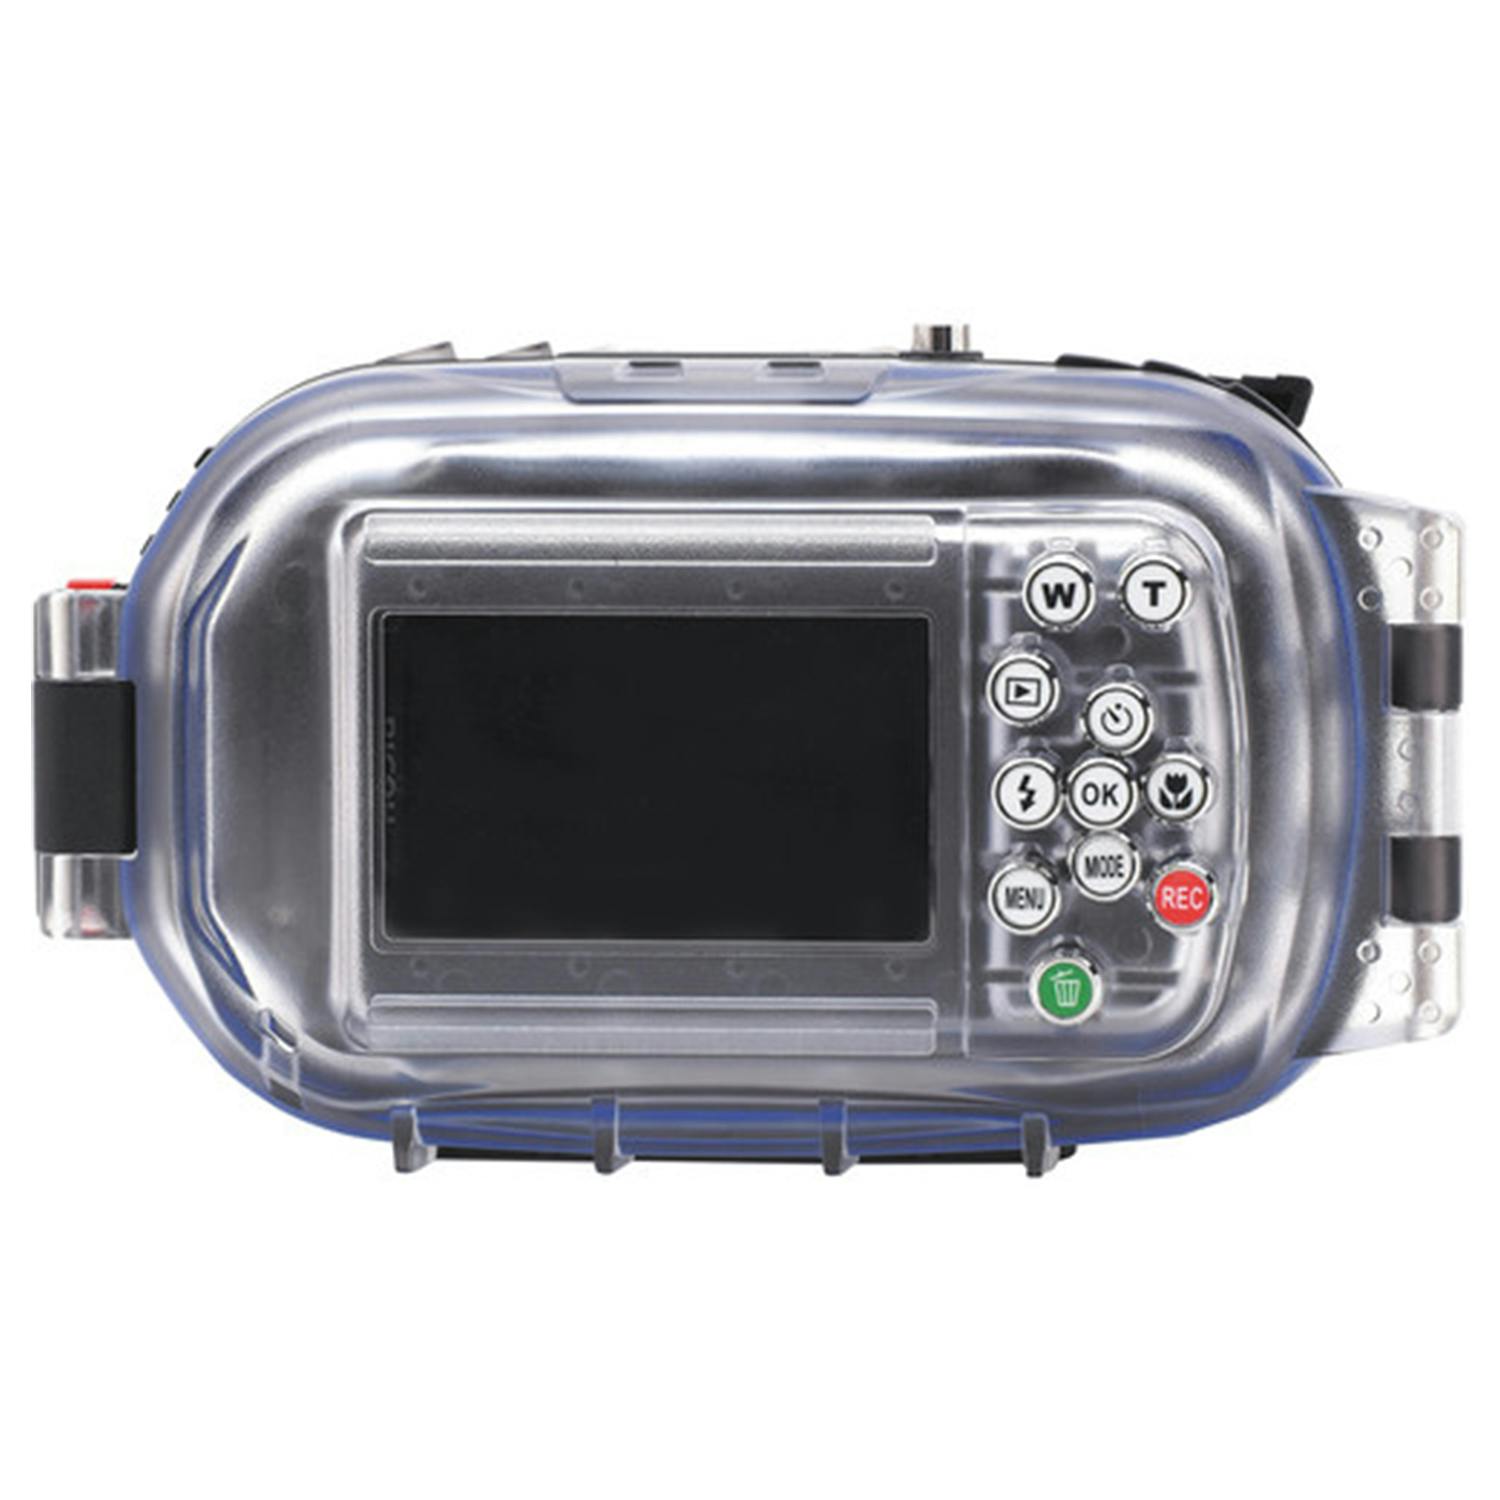 Sea & Sea DX-6G Underwater Camera and Housing Set Closed Back View